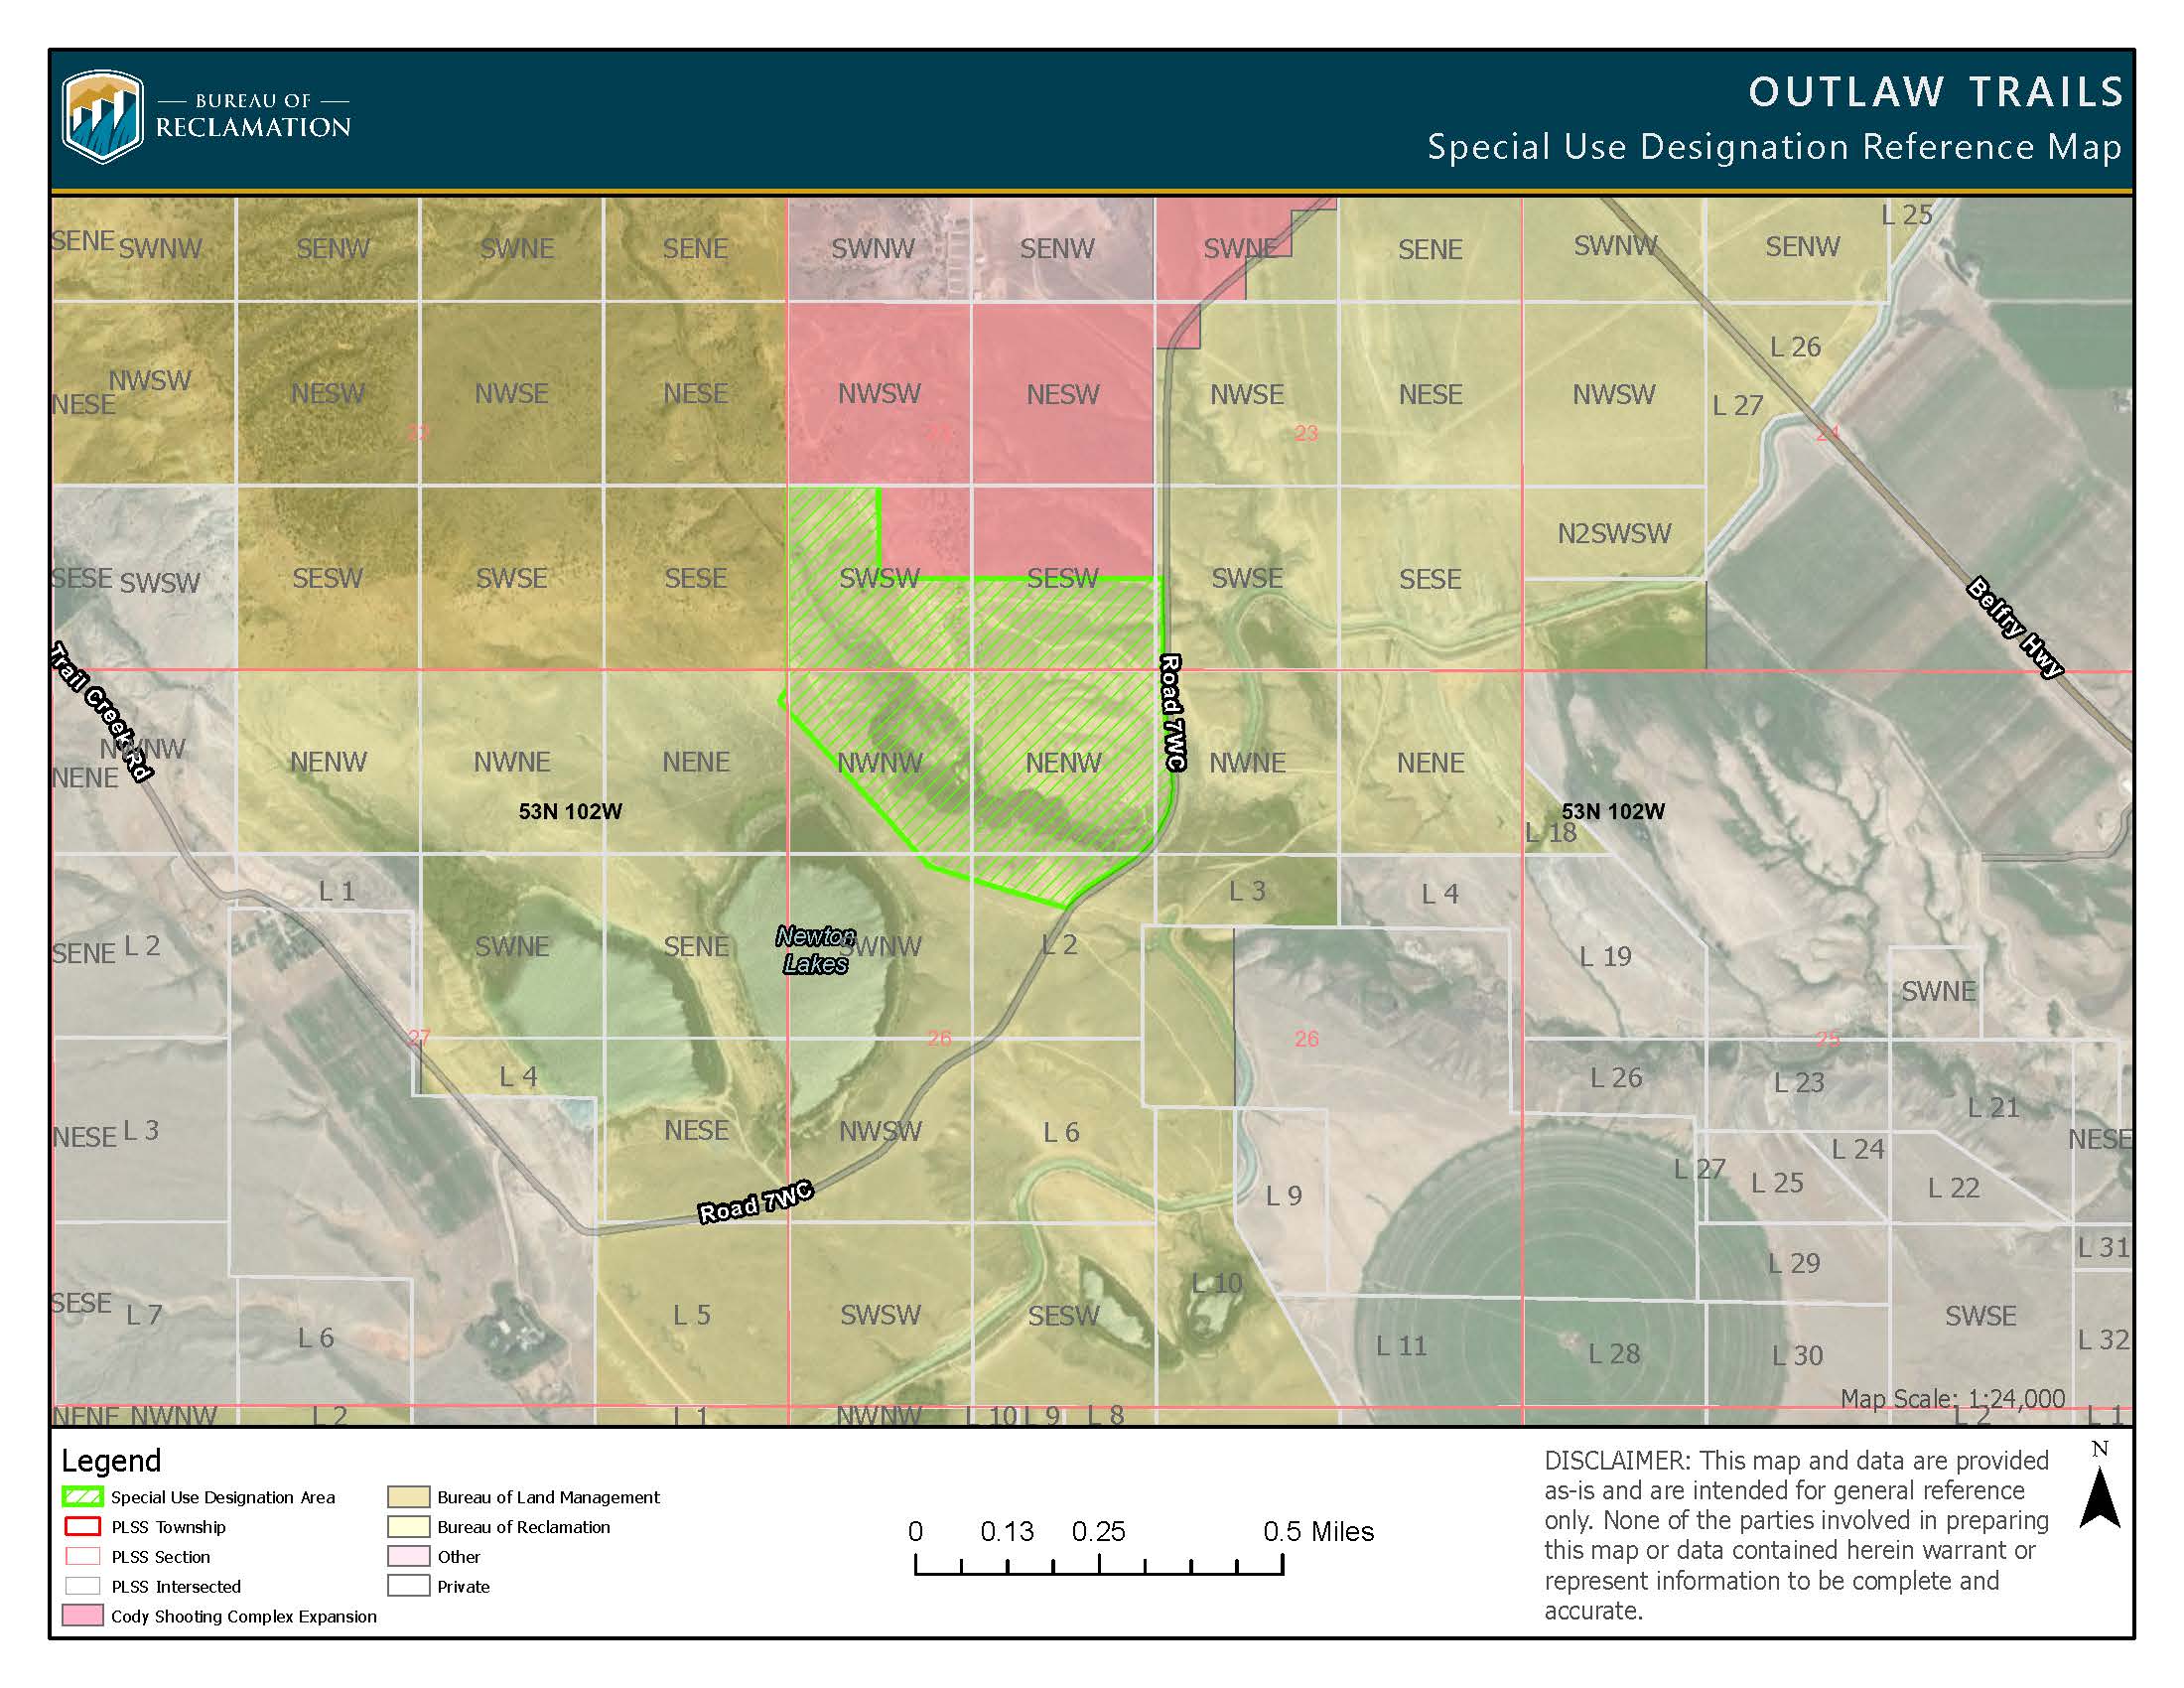 Outlaw Trails Special Use Designation Aerial Reference Map